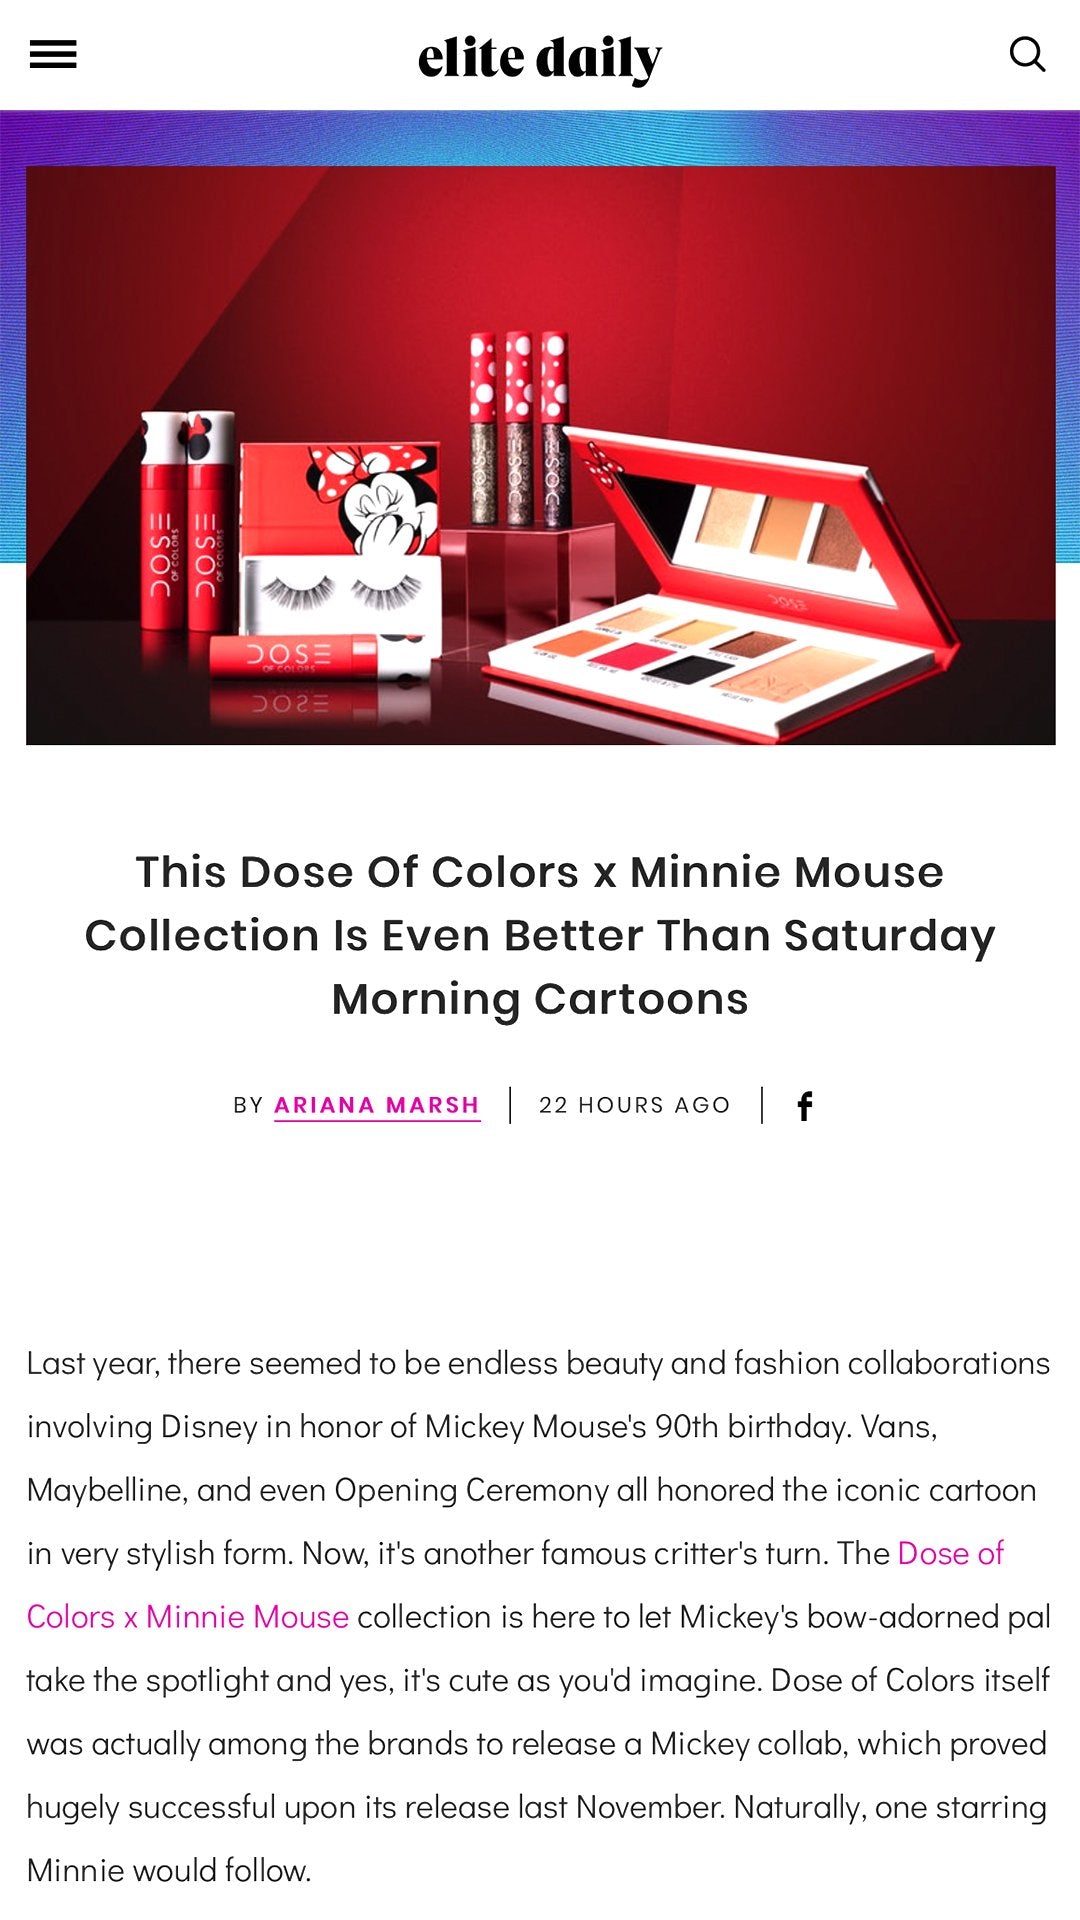 Elite Daily - Dose of Colors x Minnie Mouse